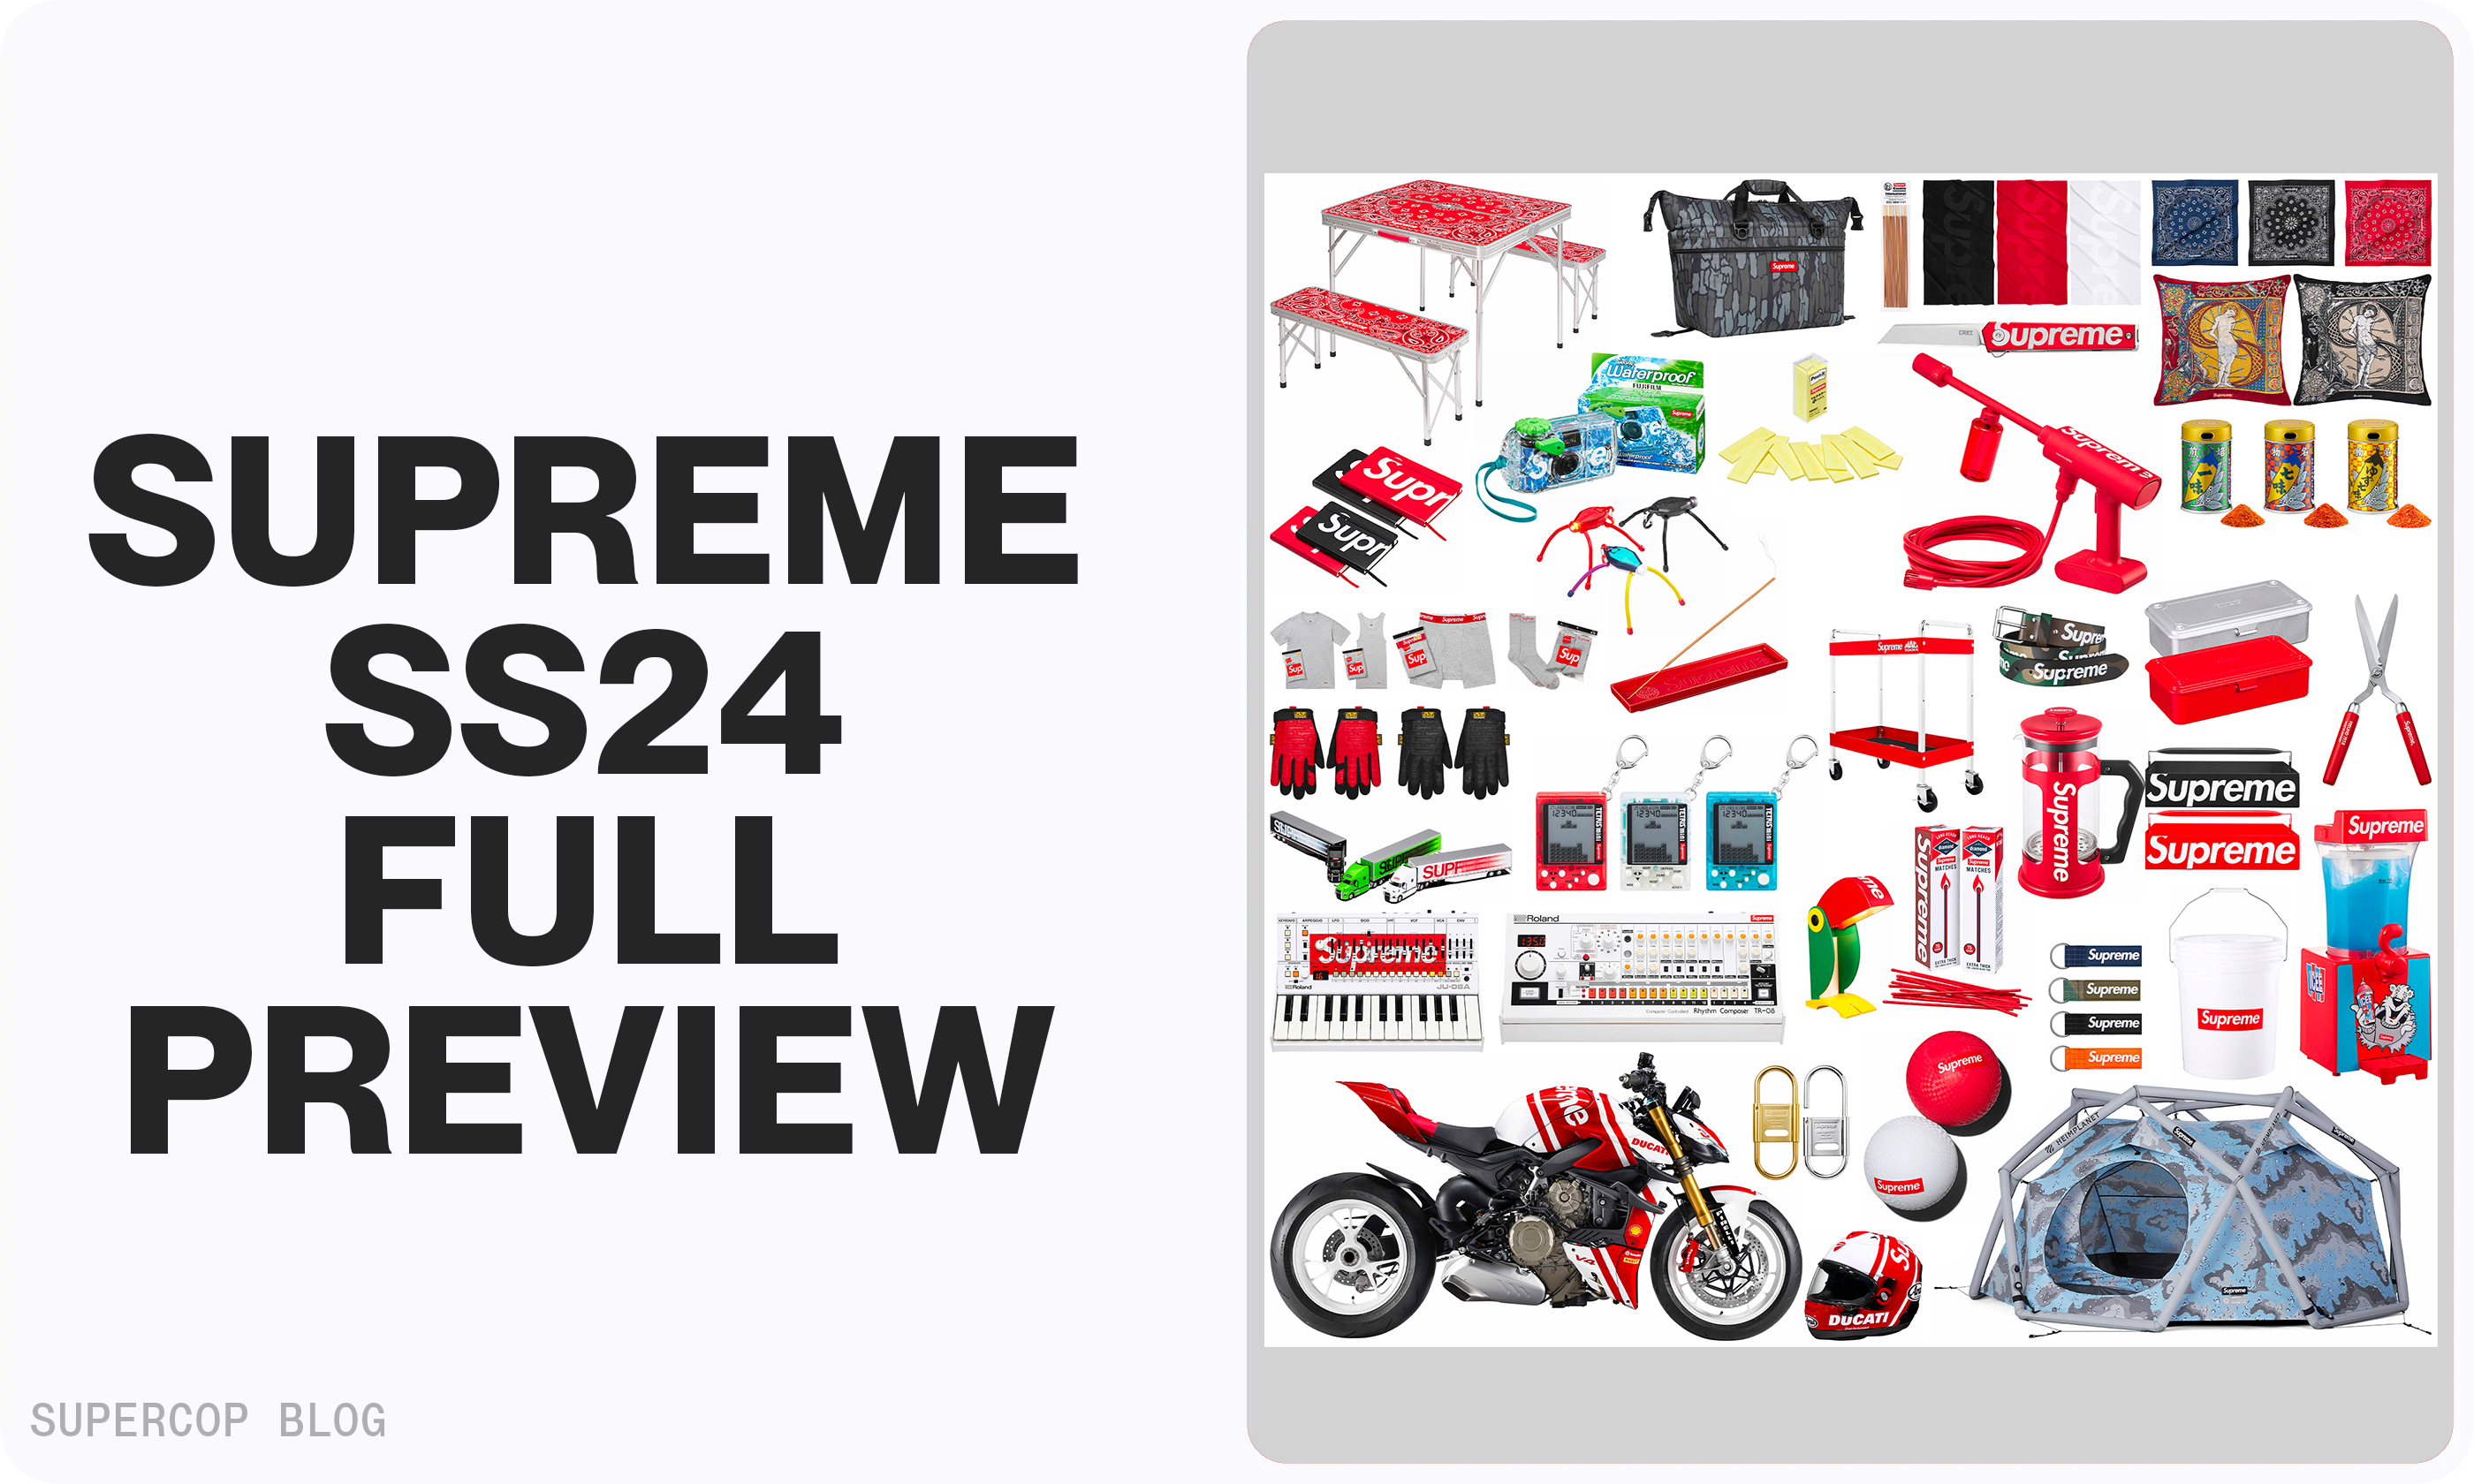 Supreme SS24 Full Preview